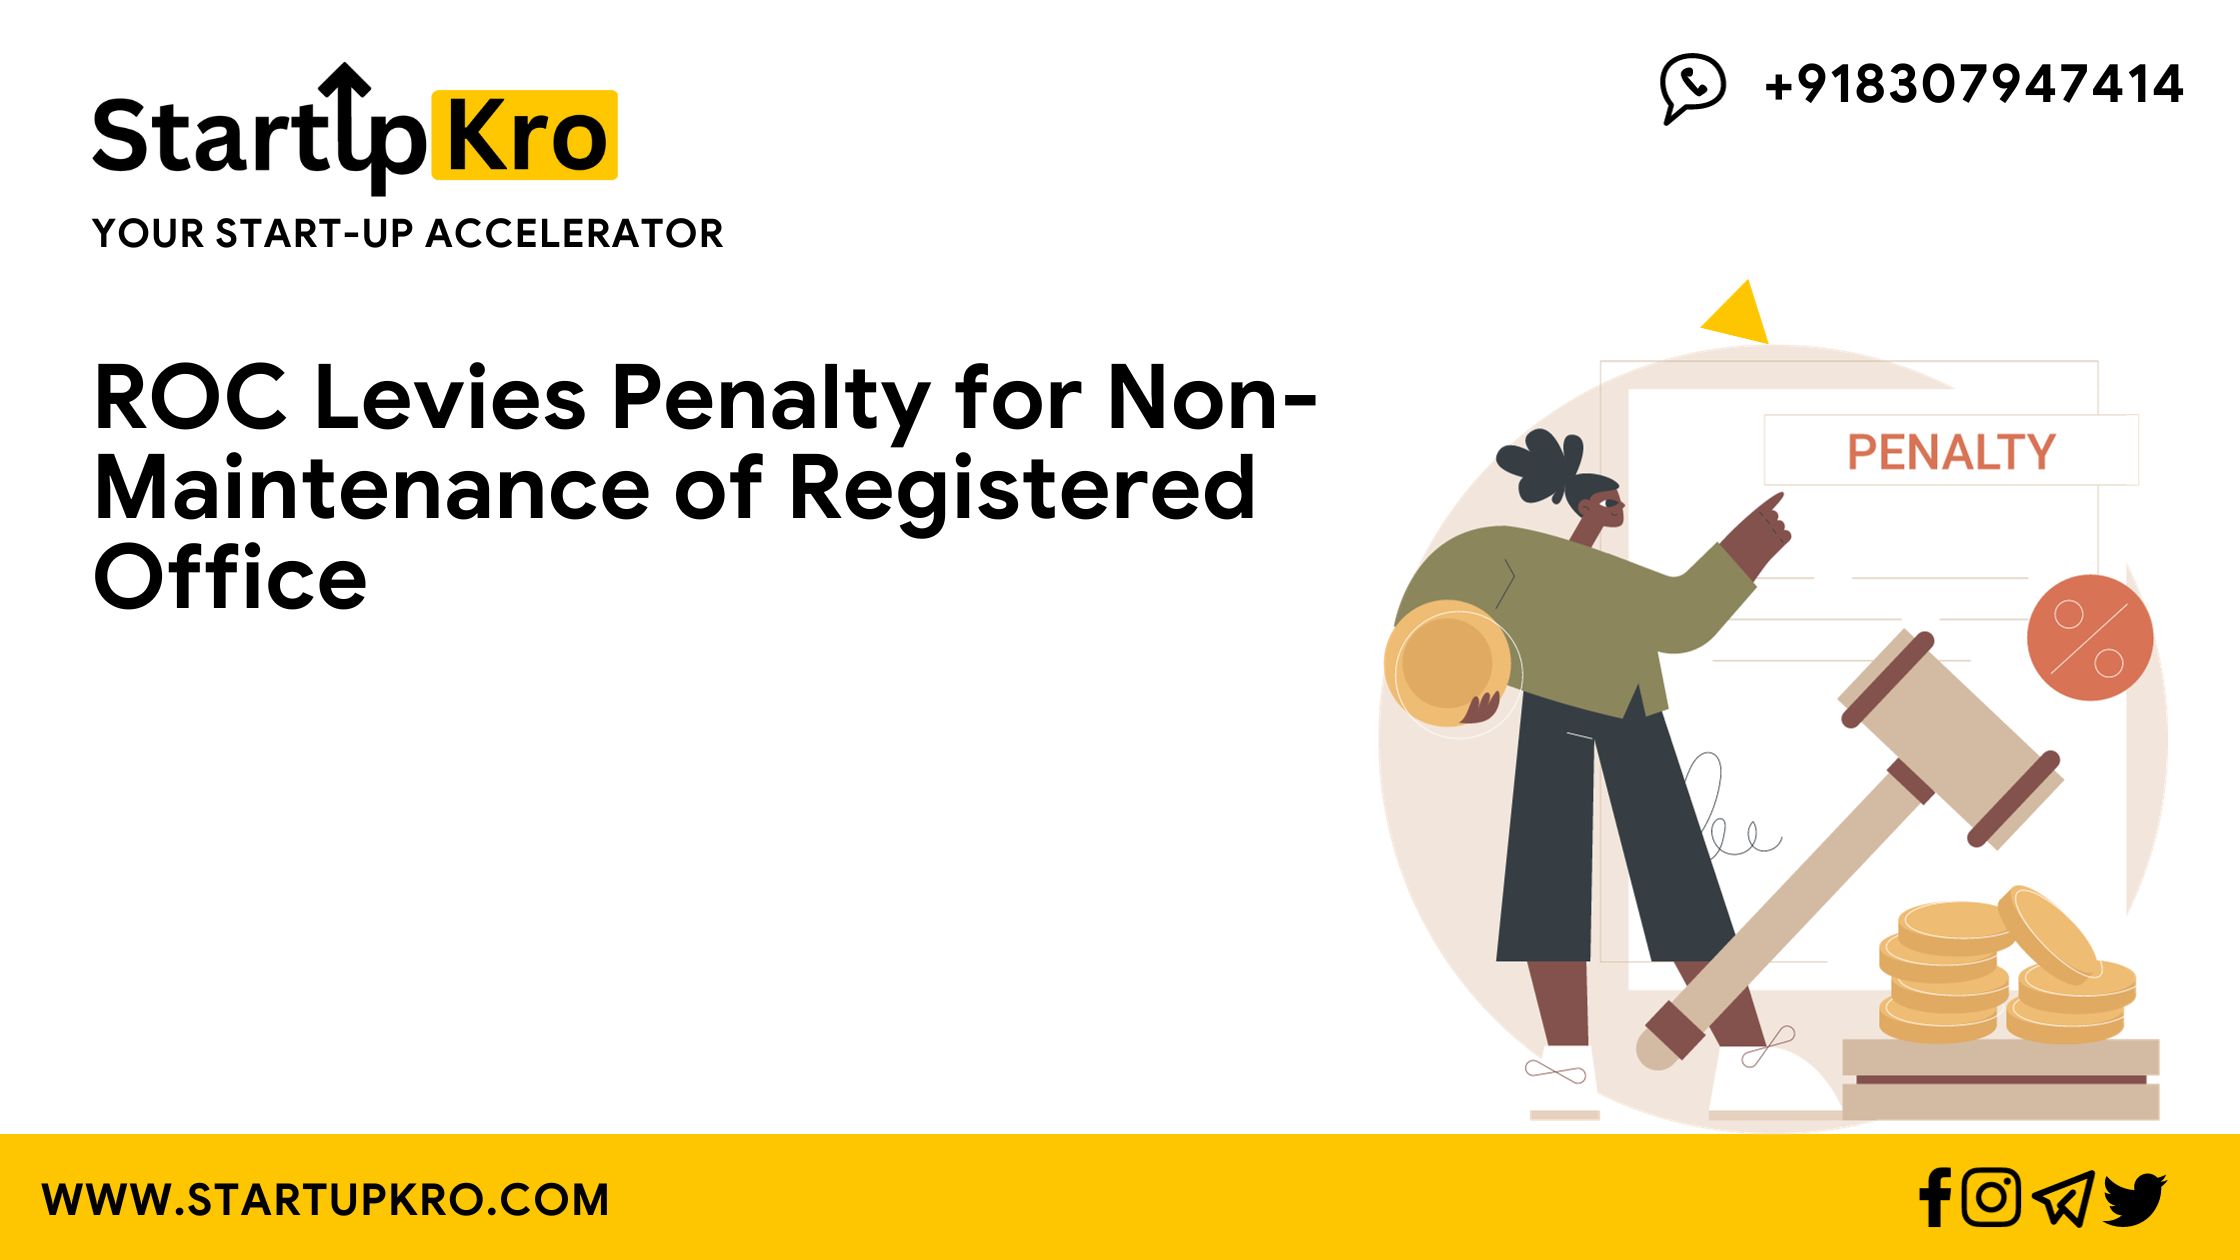 ROC Levies Penalty for Non-Maintenance of Registered Office